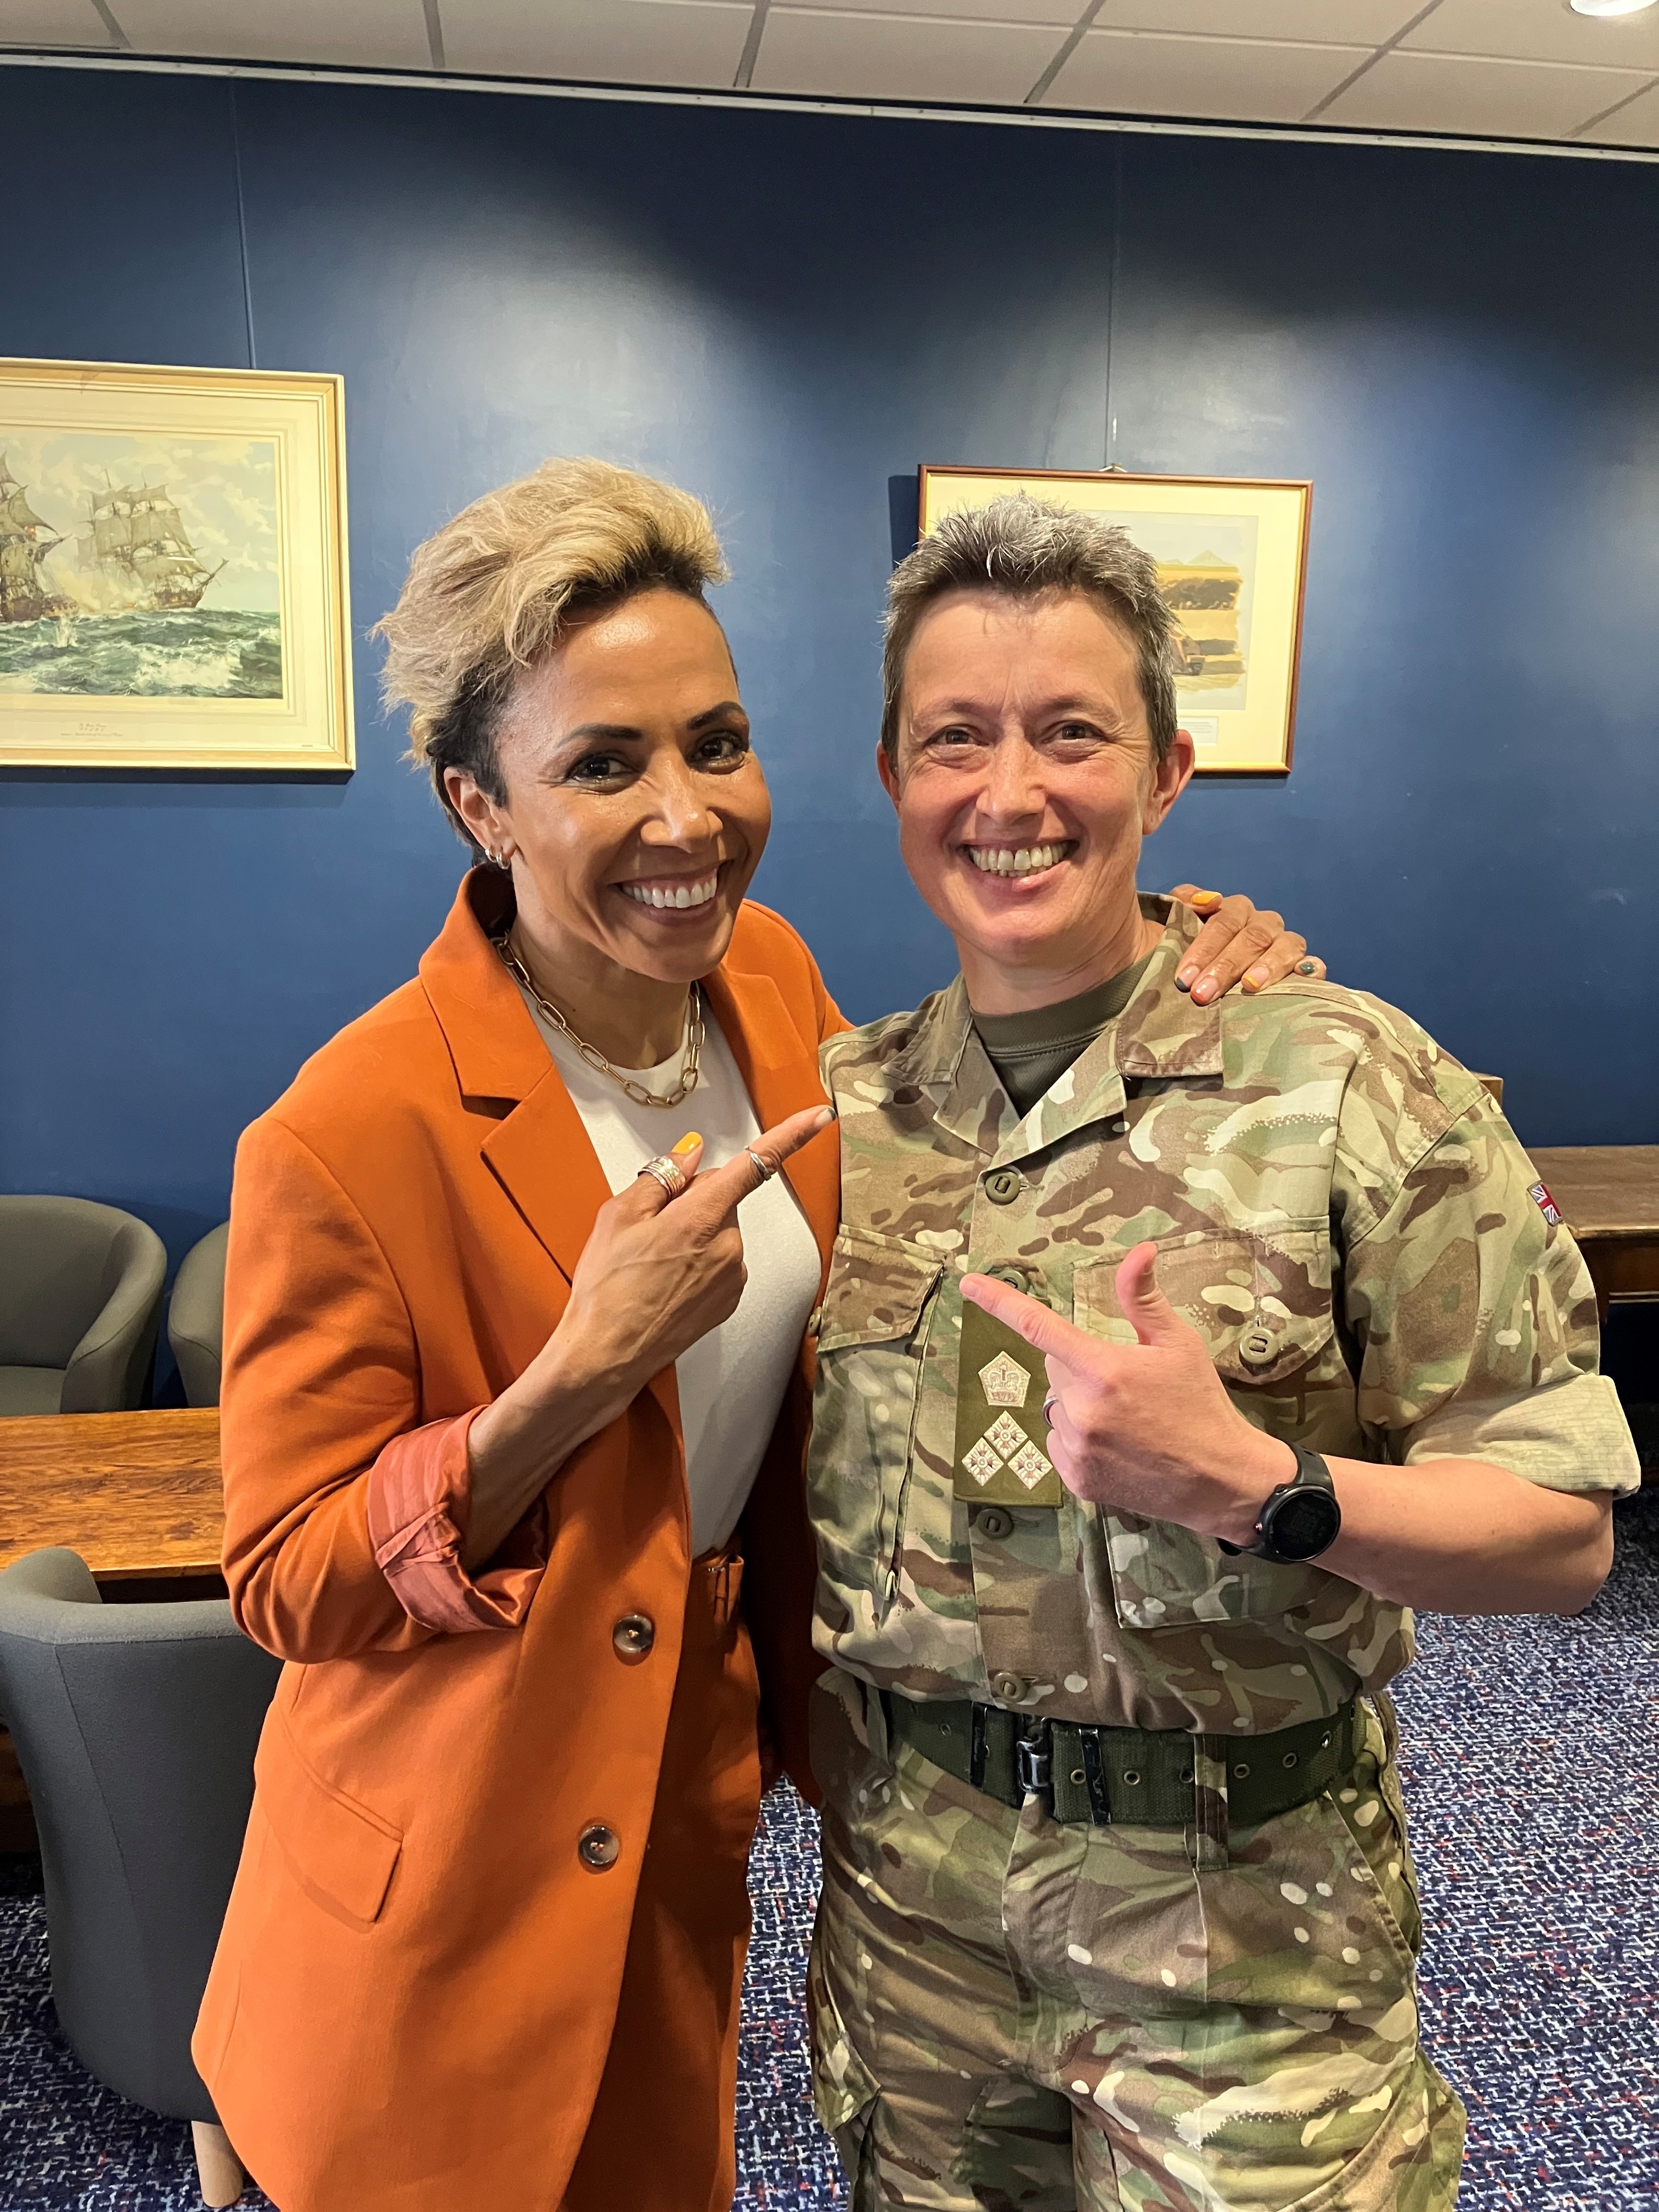 Dame Kelly Holmes, former soldier and Honorary Colonel of the Royal Armoured Corps Training Regiment and Brigadier Clare Phillips CBE, Chair of the Army LGBT+ Network during the filming of Dame Kelly's documentary 2022.